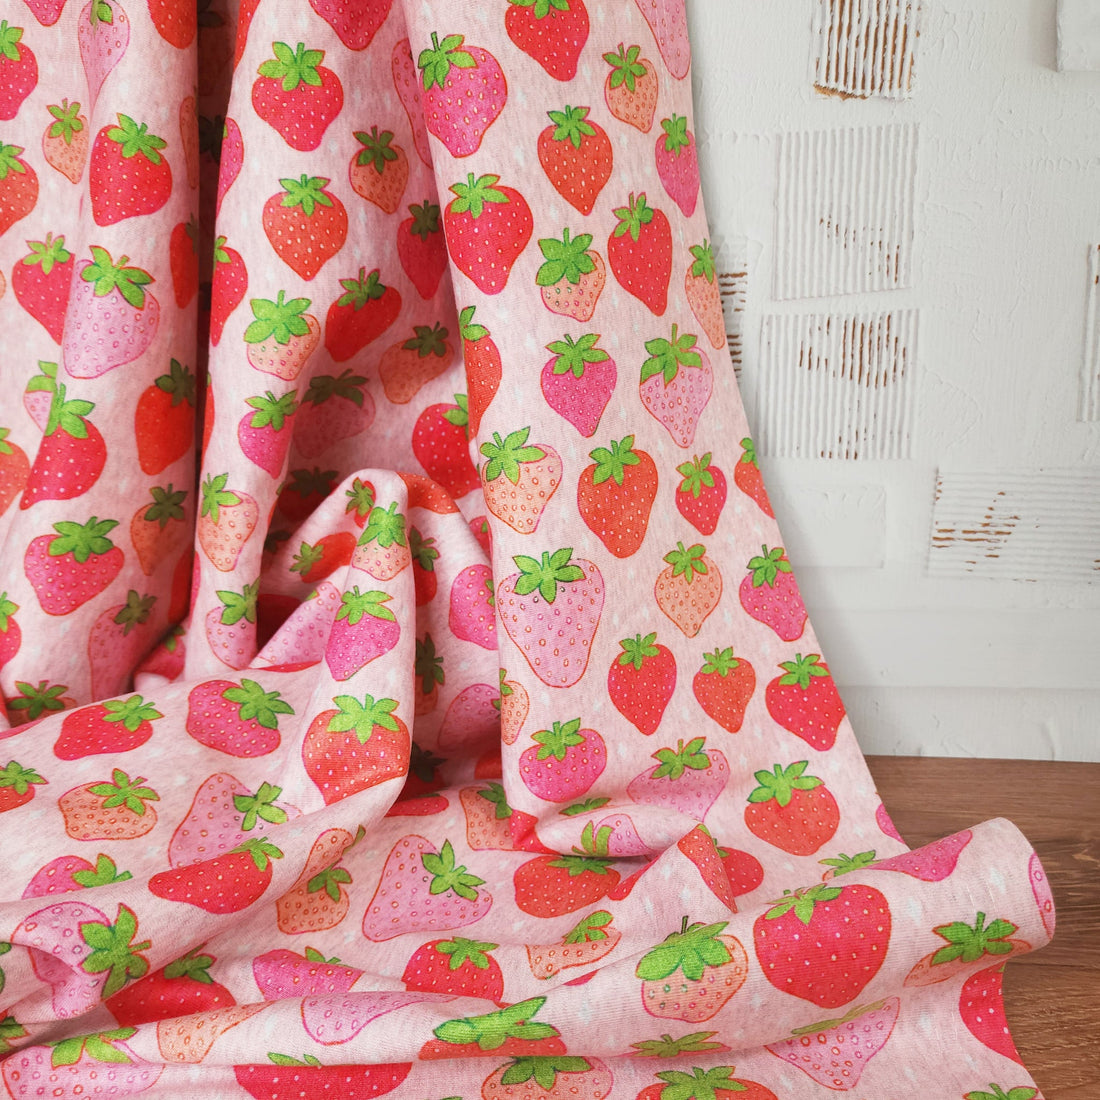 strawberry blanket laid against a white background